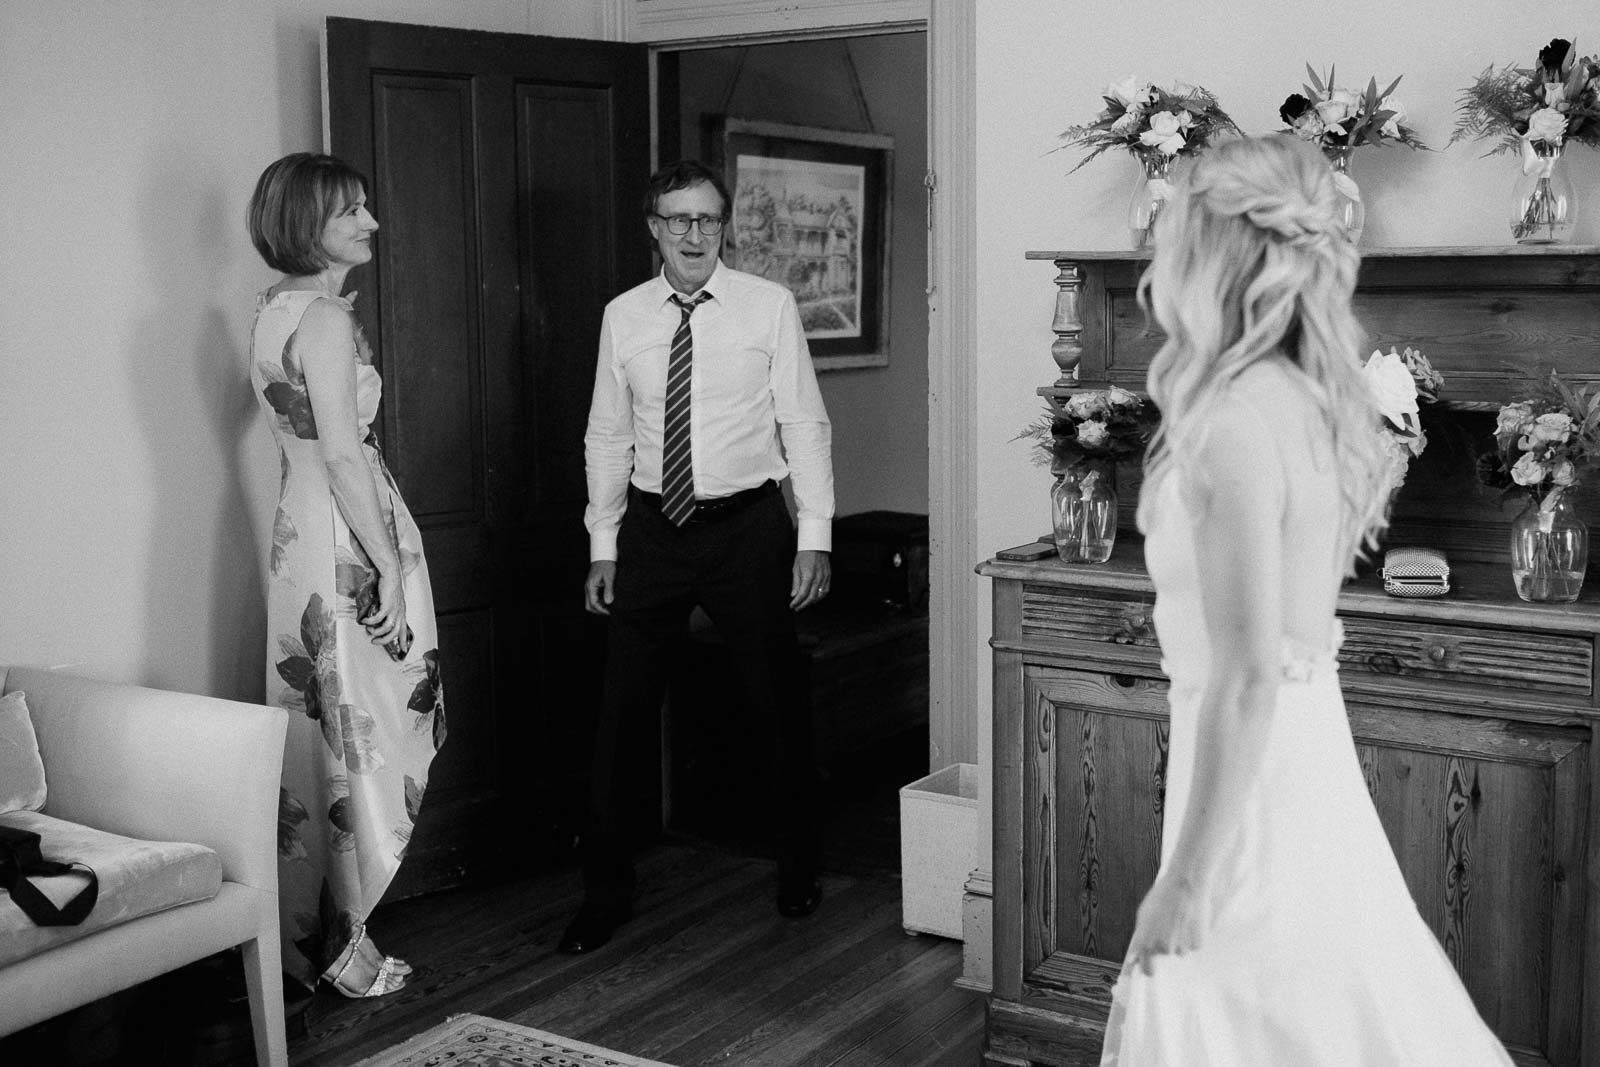 The father of the bride sees his daughter for the first time and the look on his face is priceless